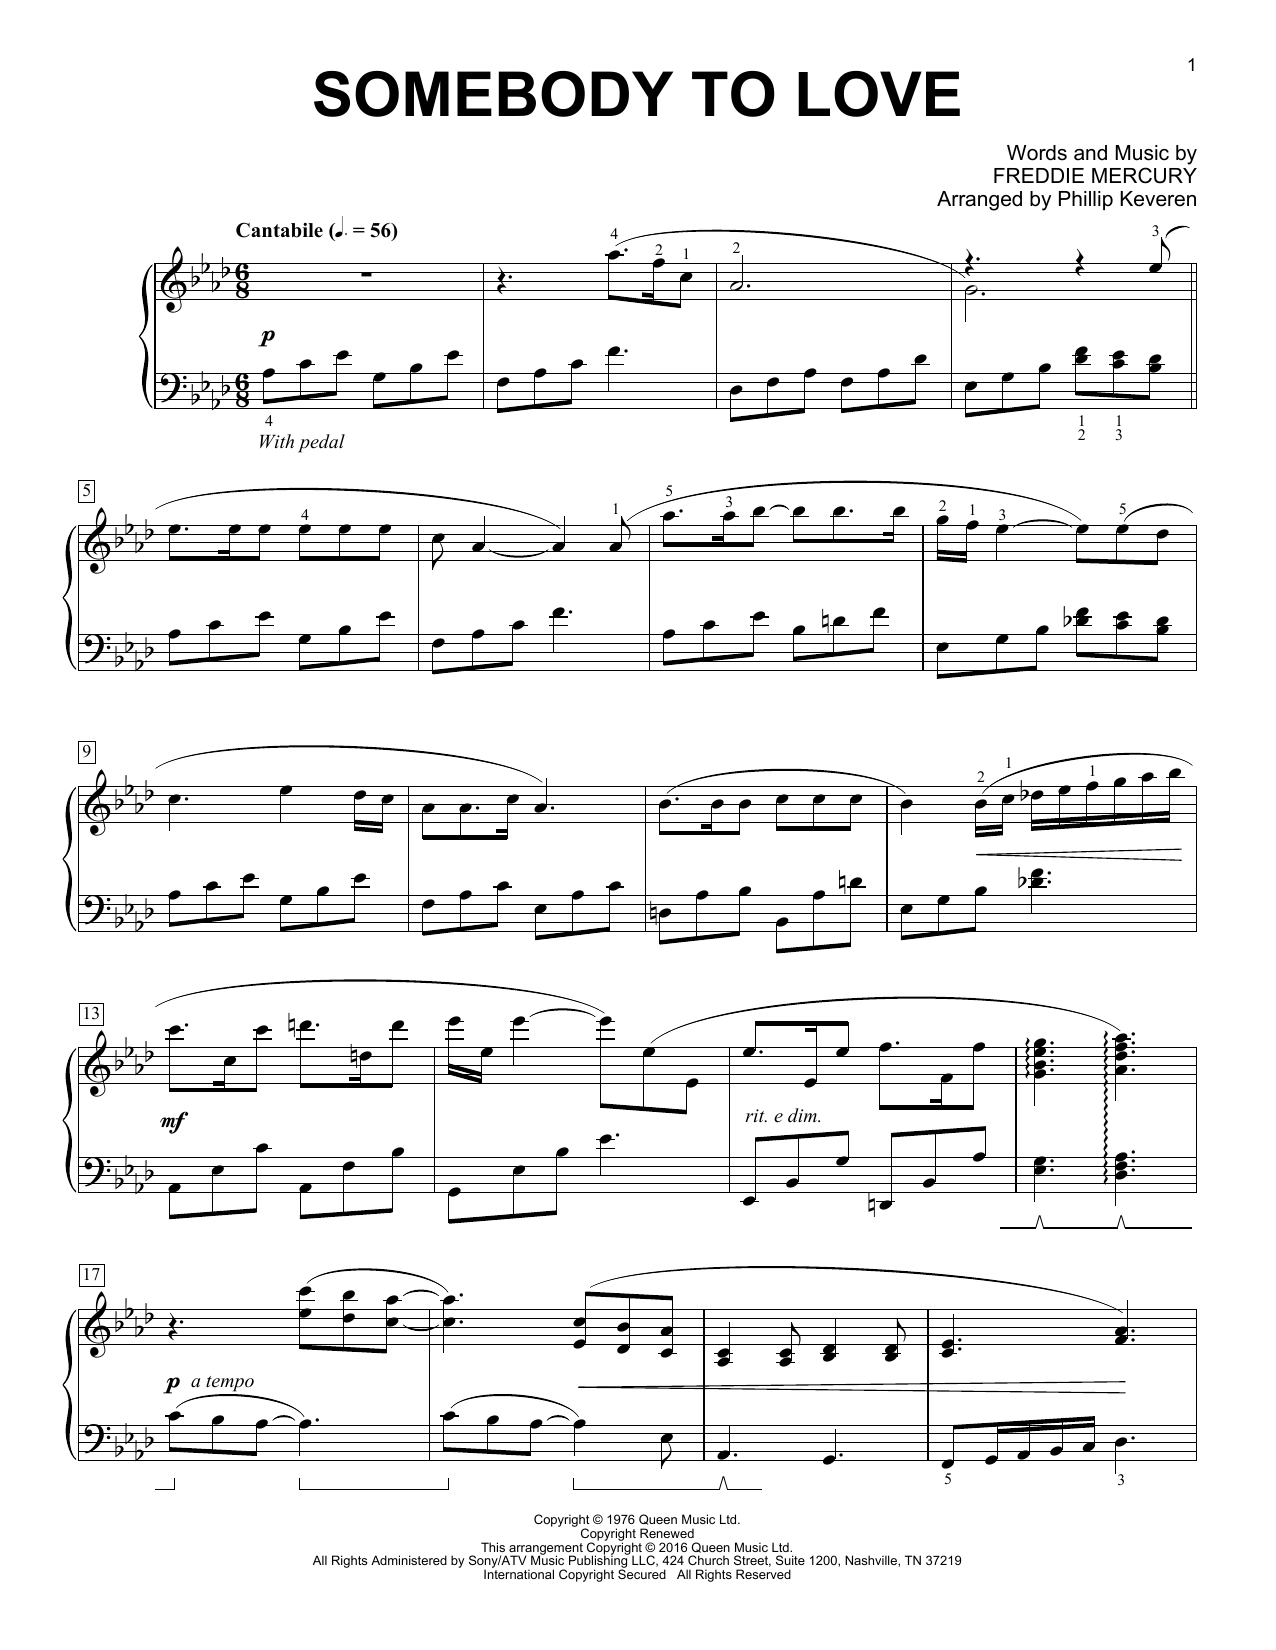 Download Queen Somebody To Love [Classical version] (a Sheet Music